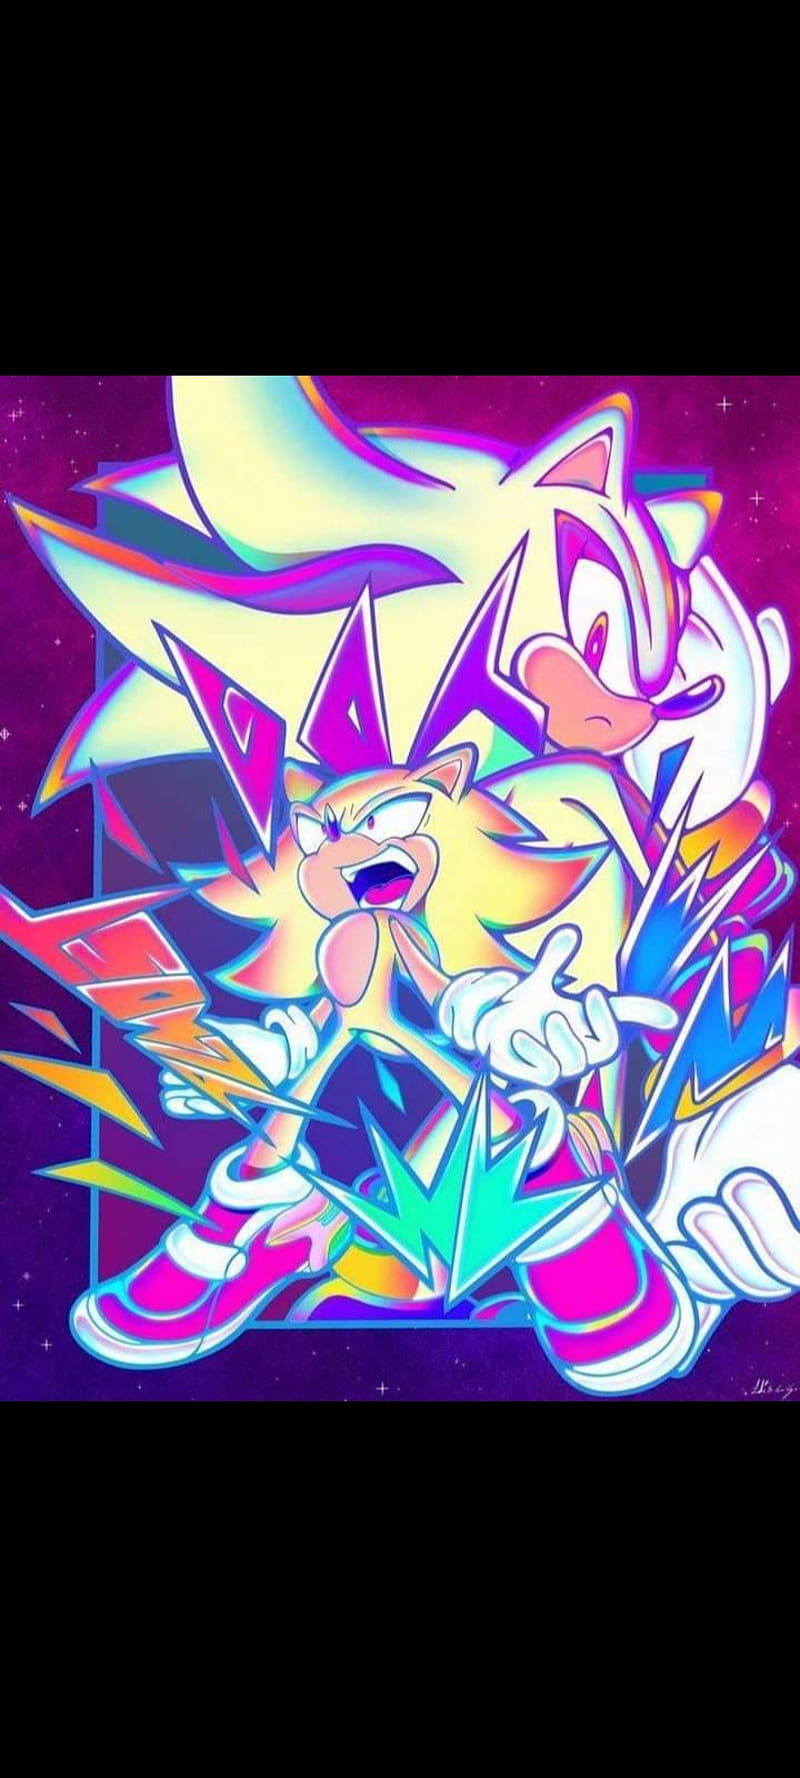 super sonic and super shadow and super silver wallpaper